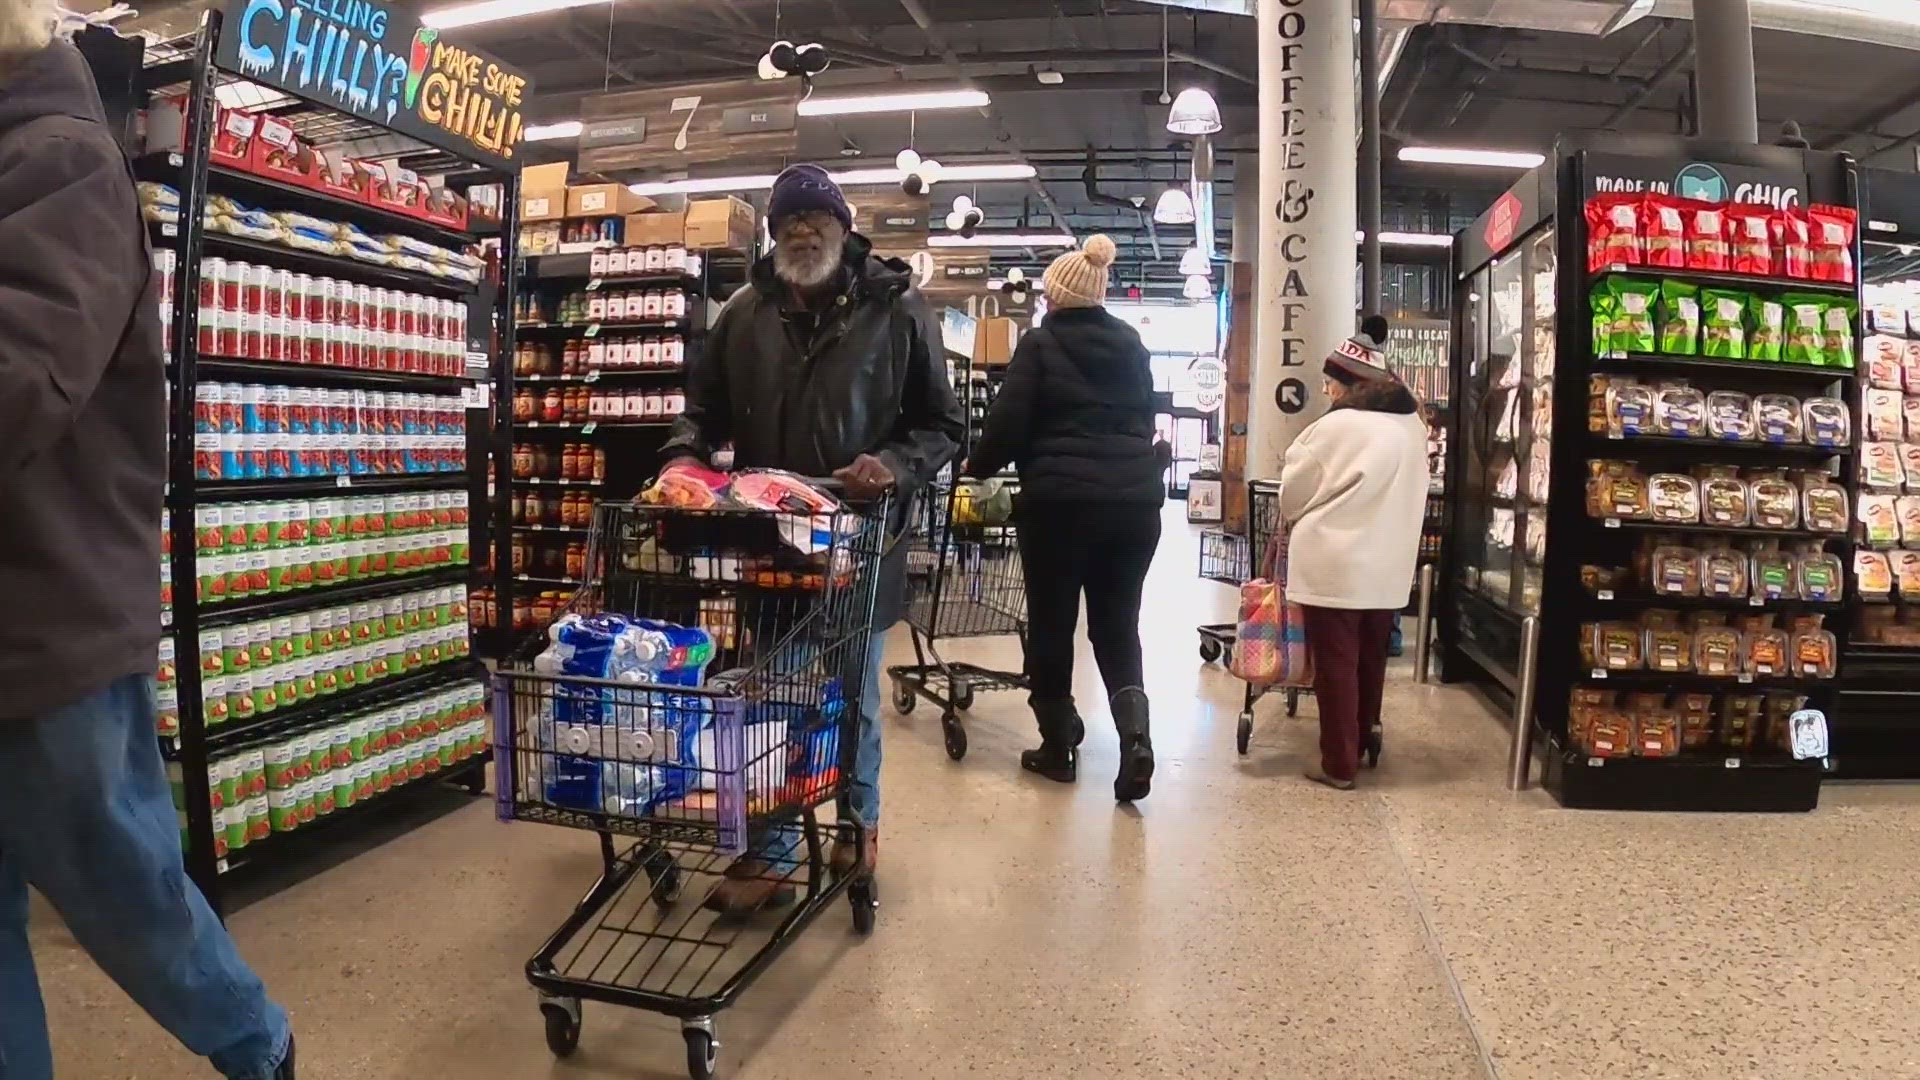 The store officially opened its doors on East 105th Street in Cleveland on Tuesday, Jan. 16.